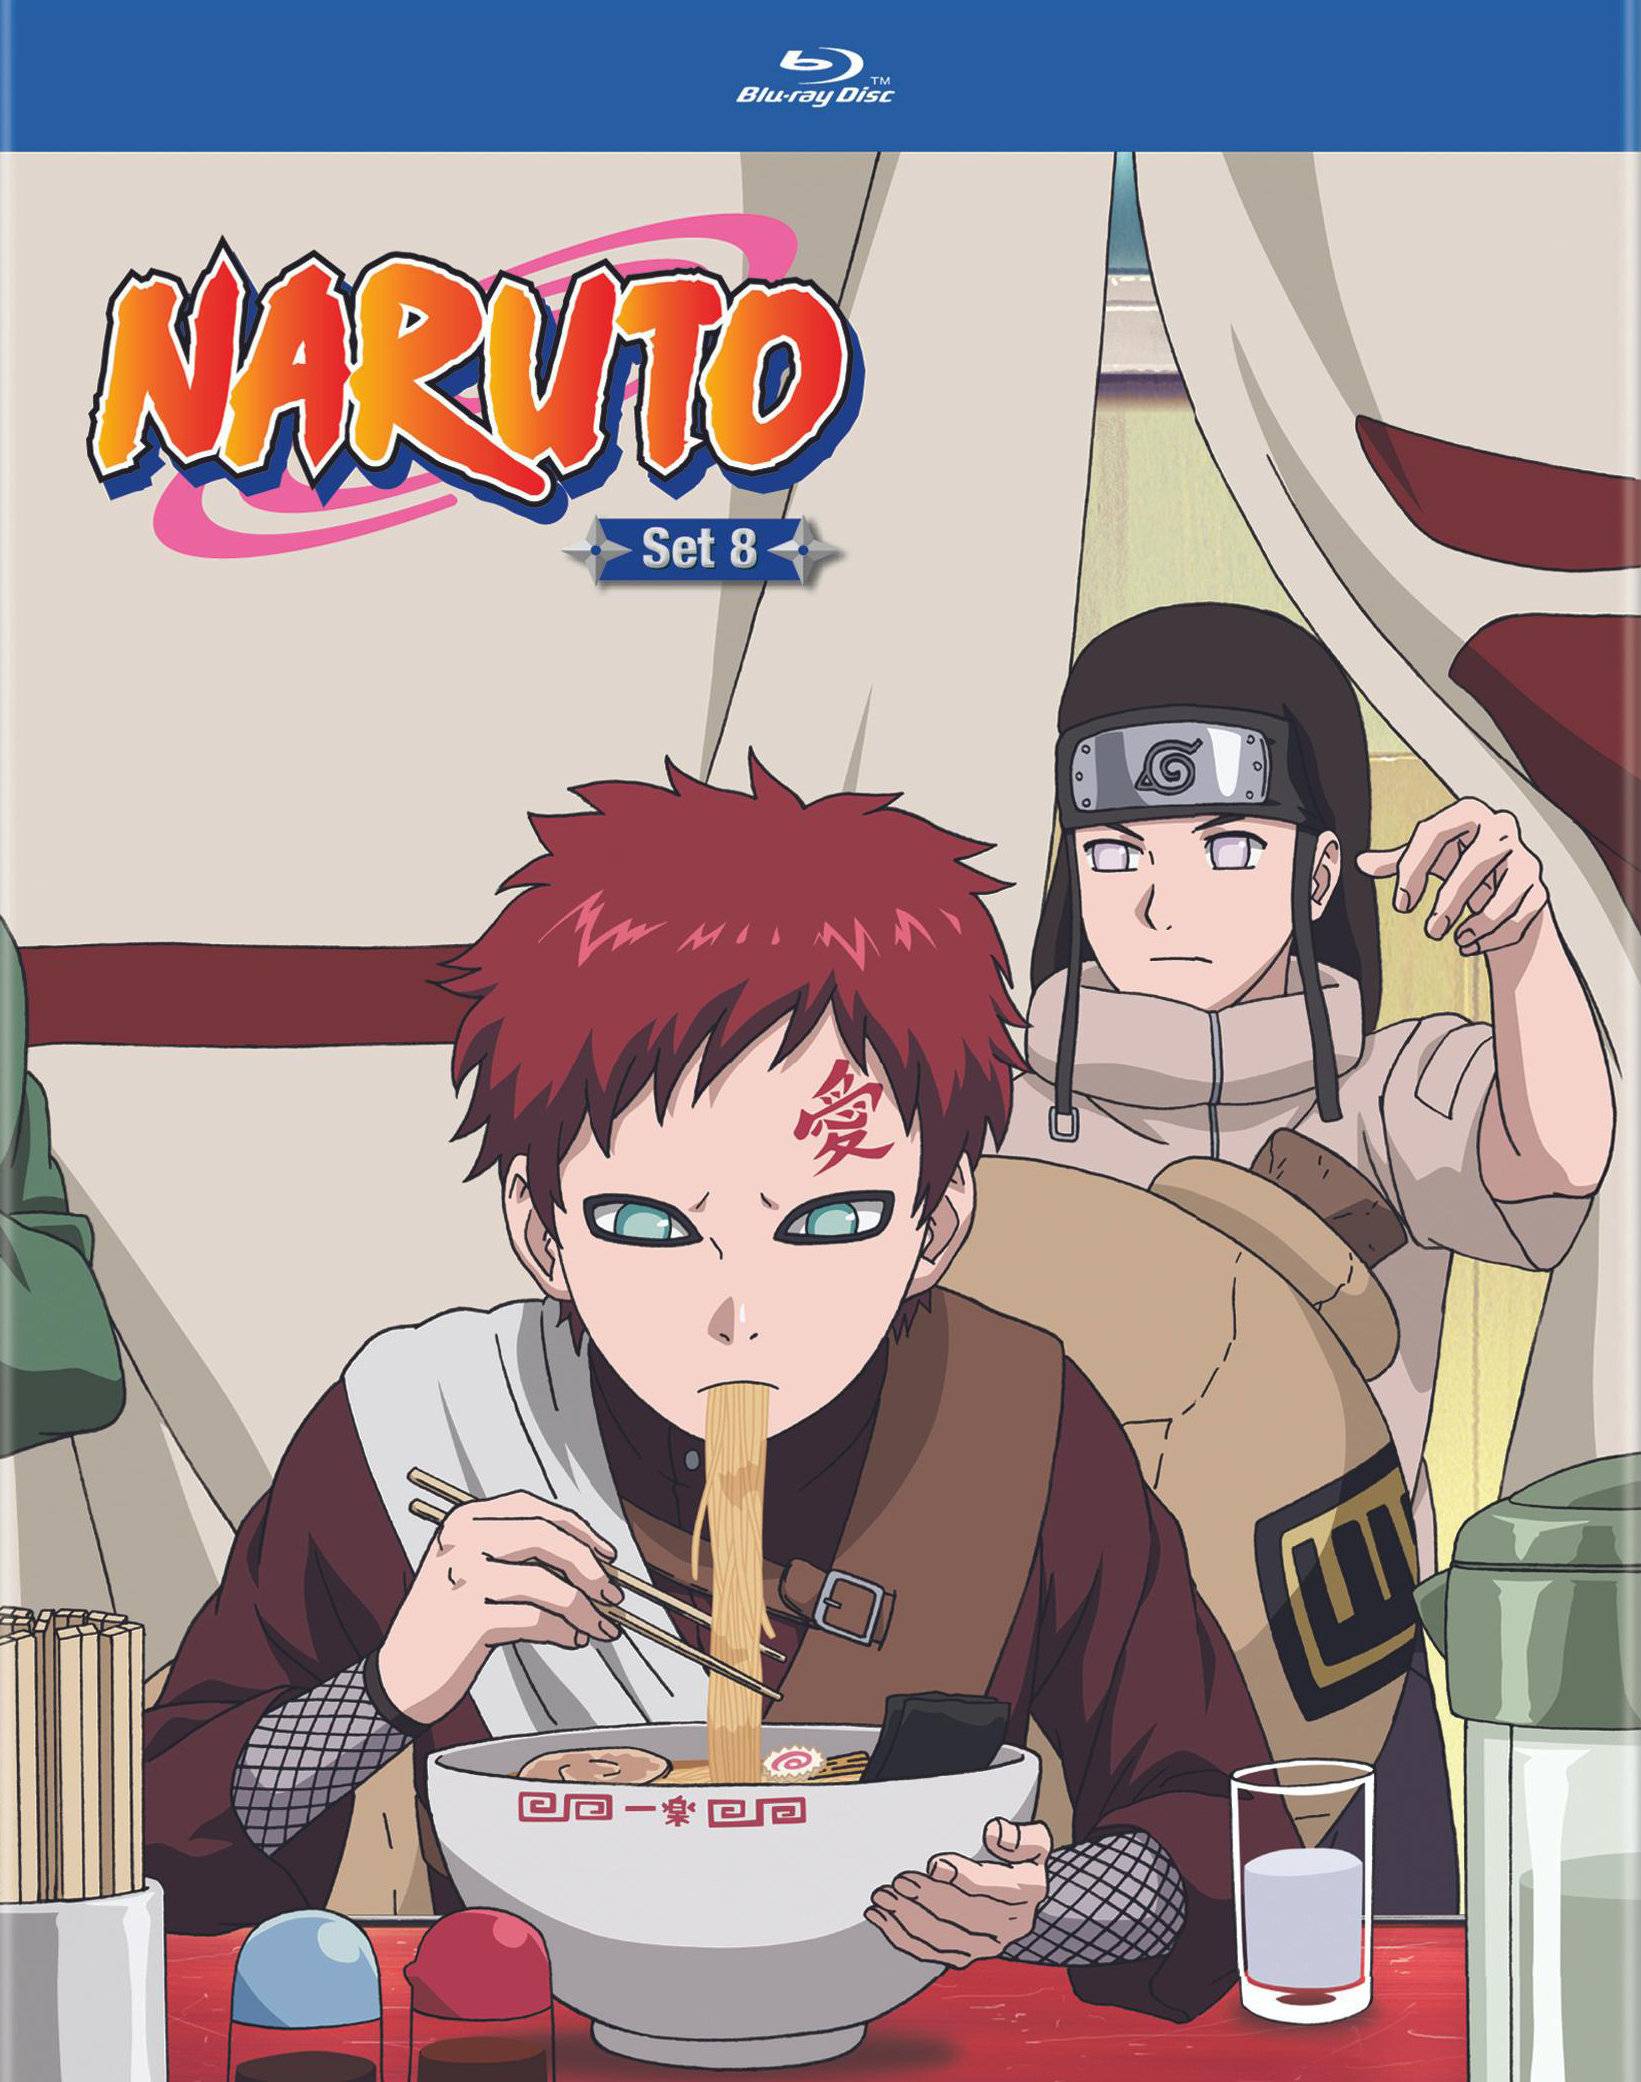 Best Buy: Naruto: Shippuden Box Set 1 [Special Edition] [3 Discs]